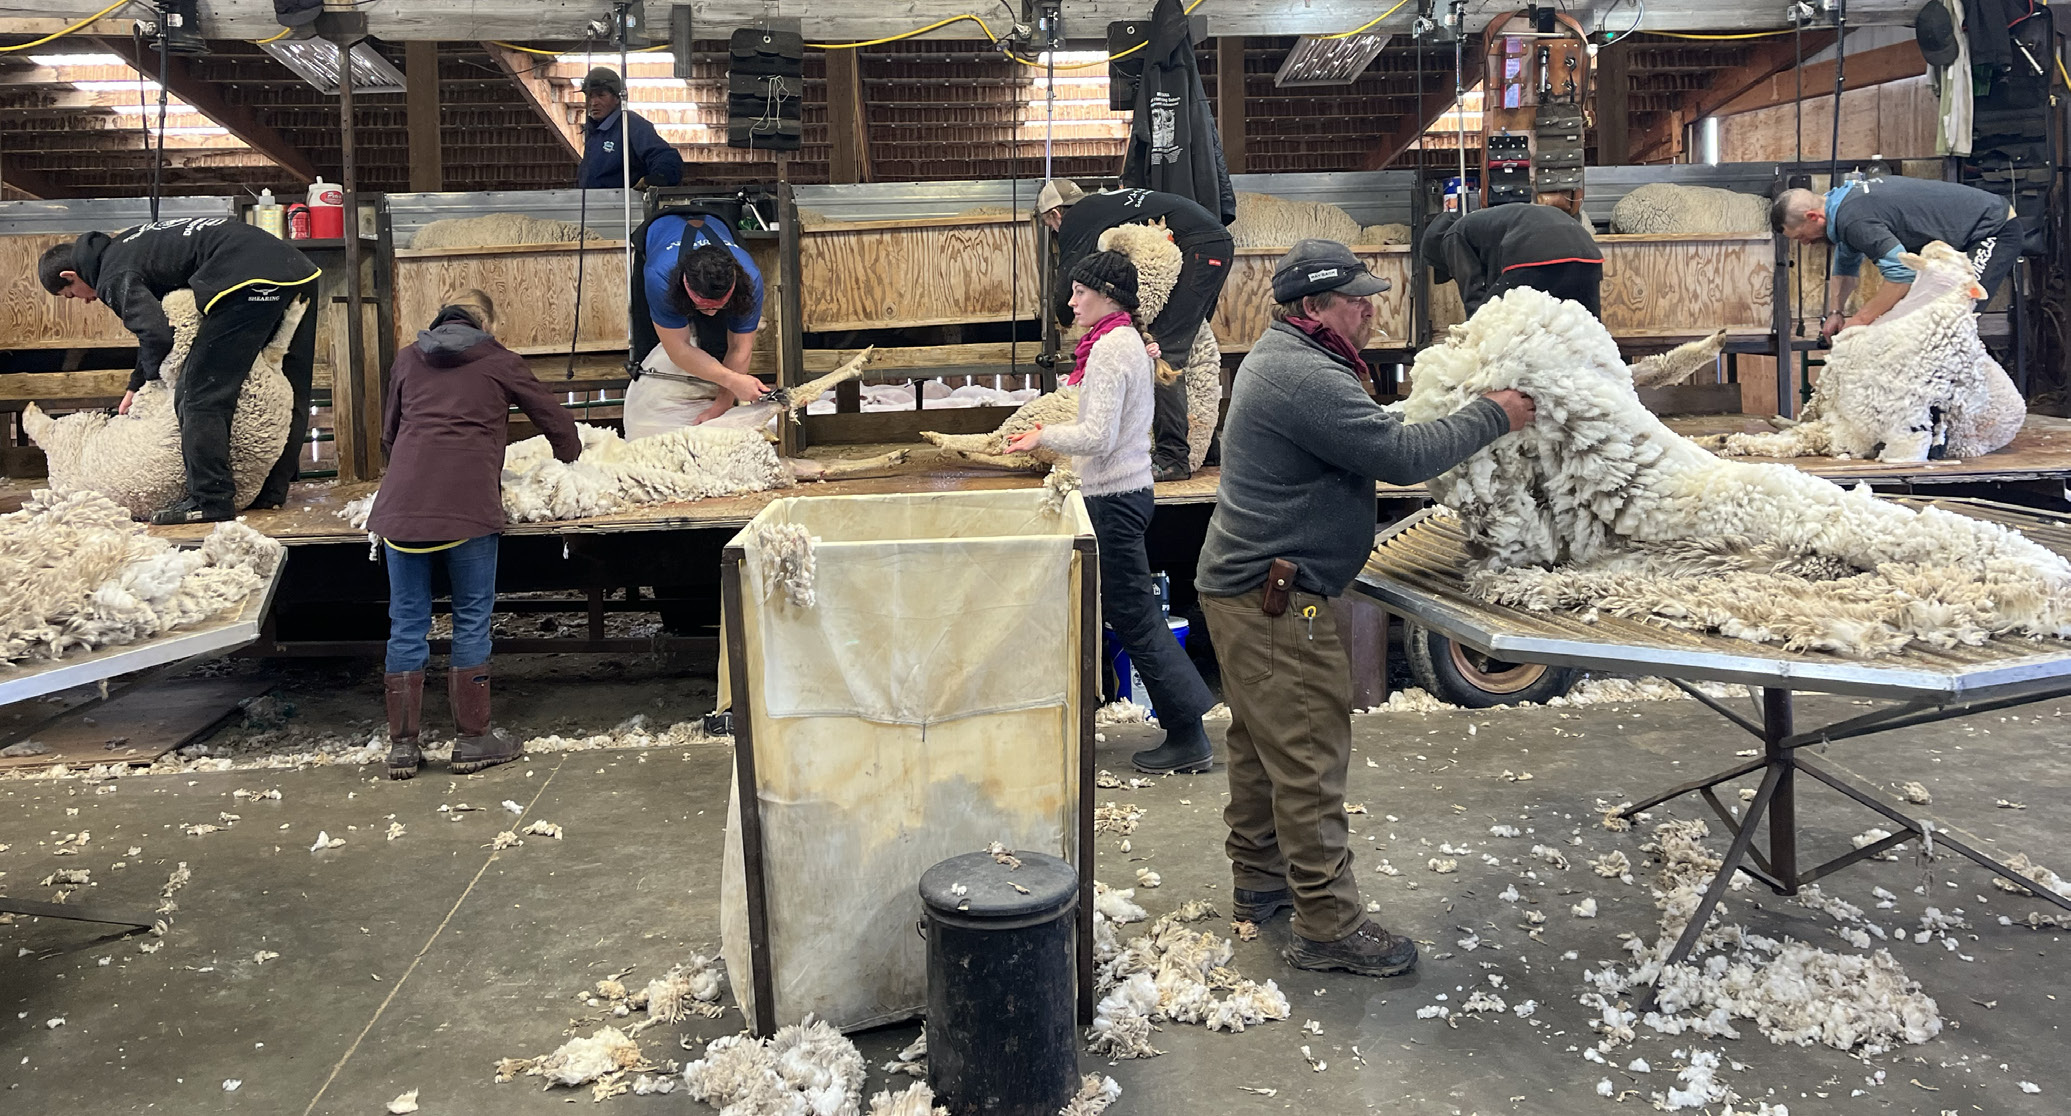 Five sheep are being sheared on tables with piles of wool all around them.